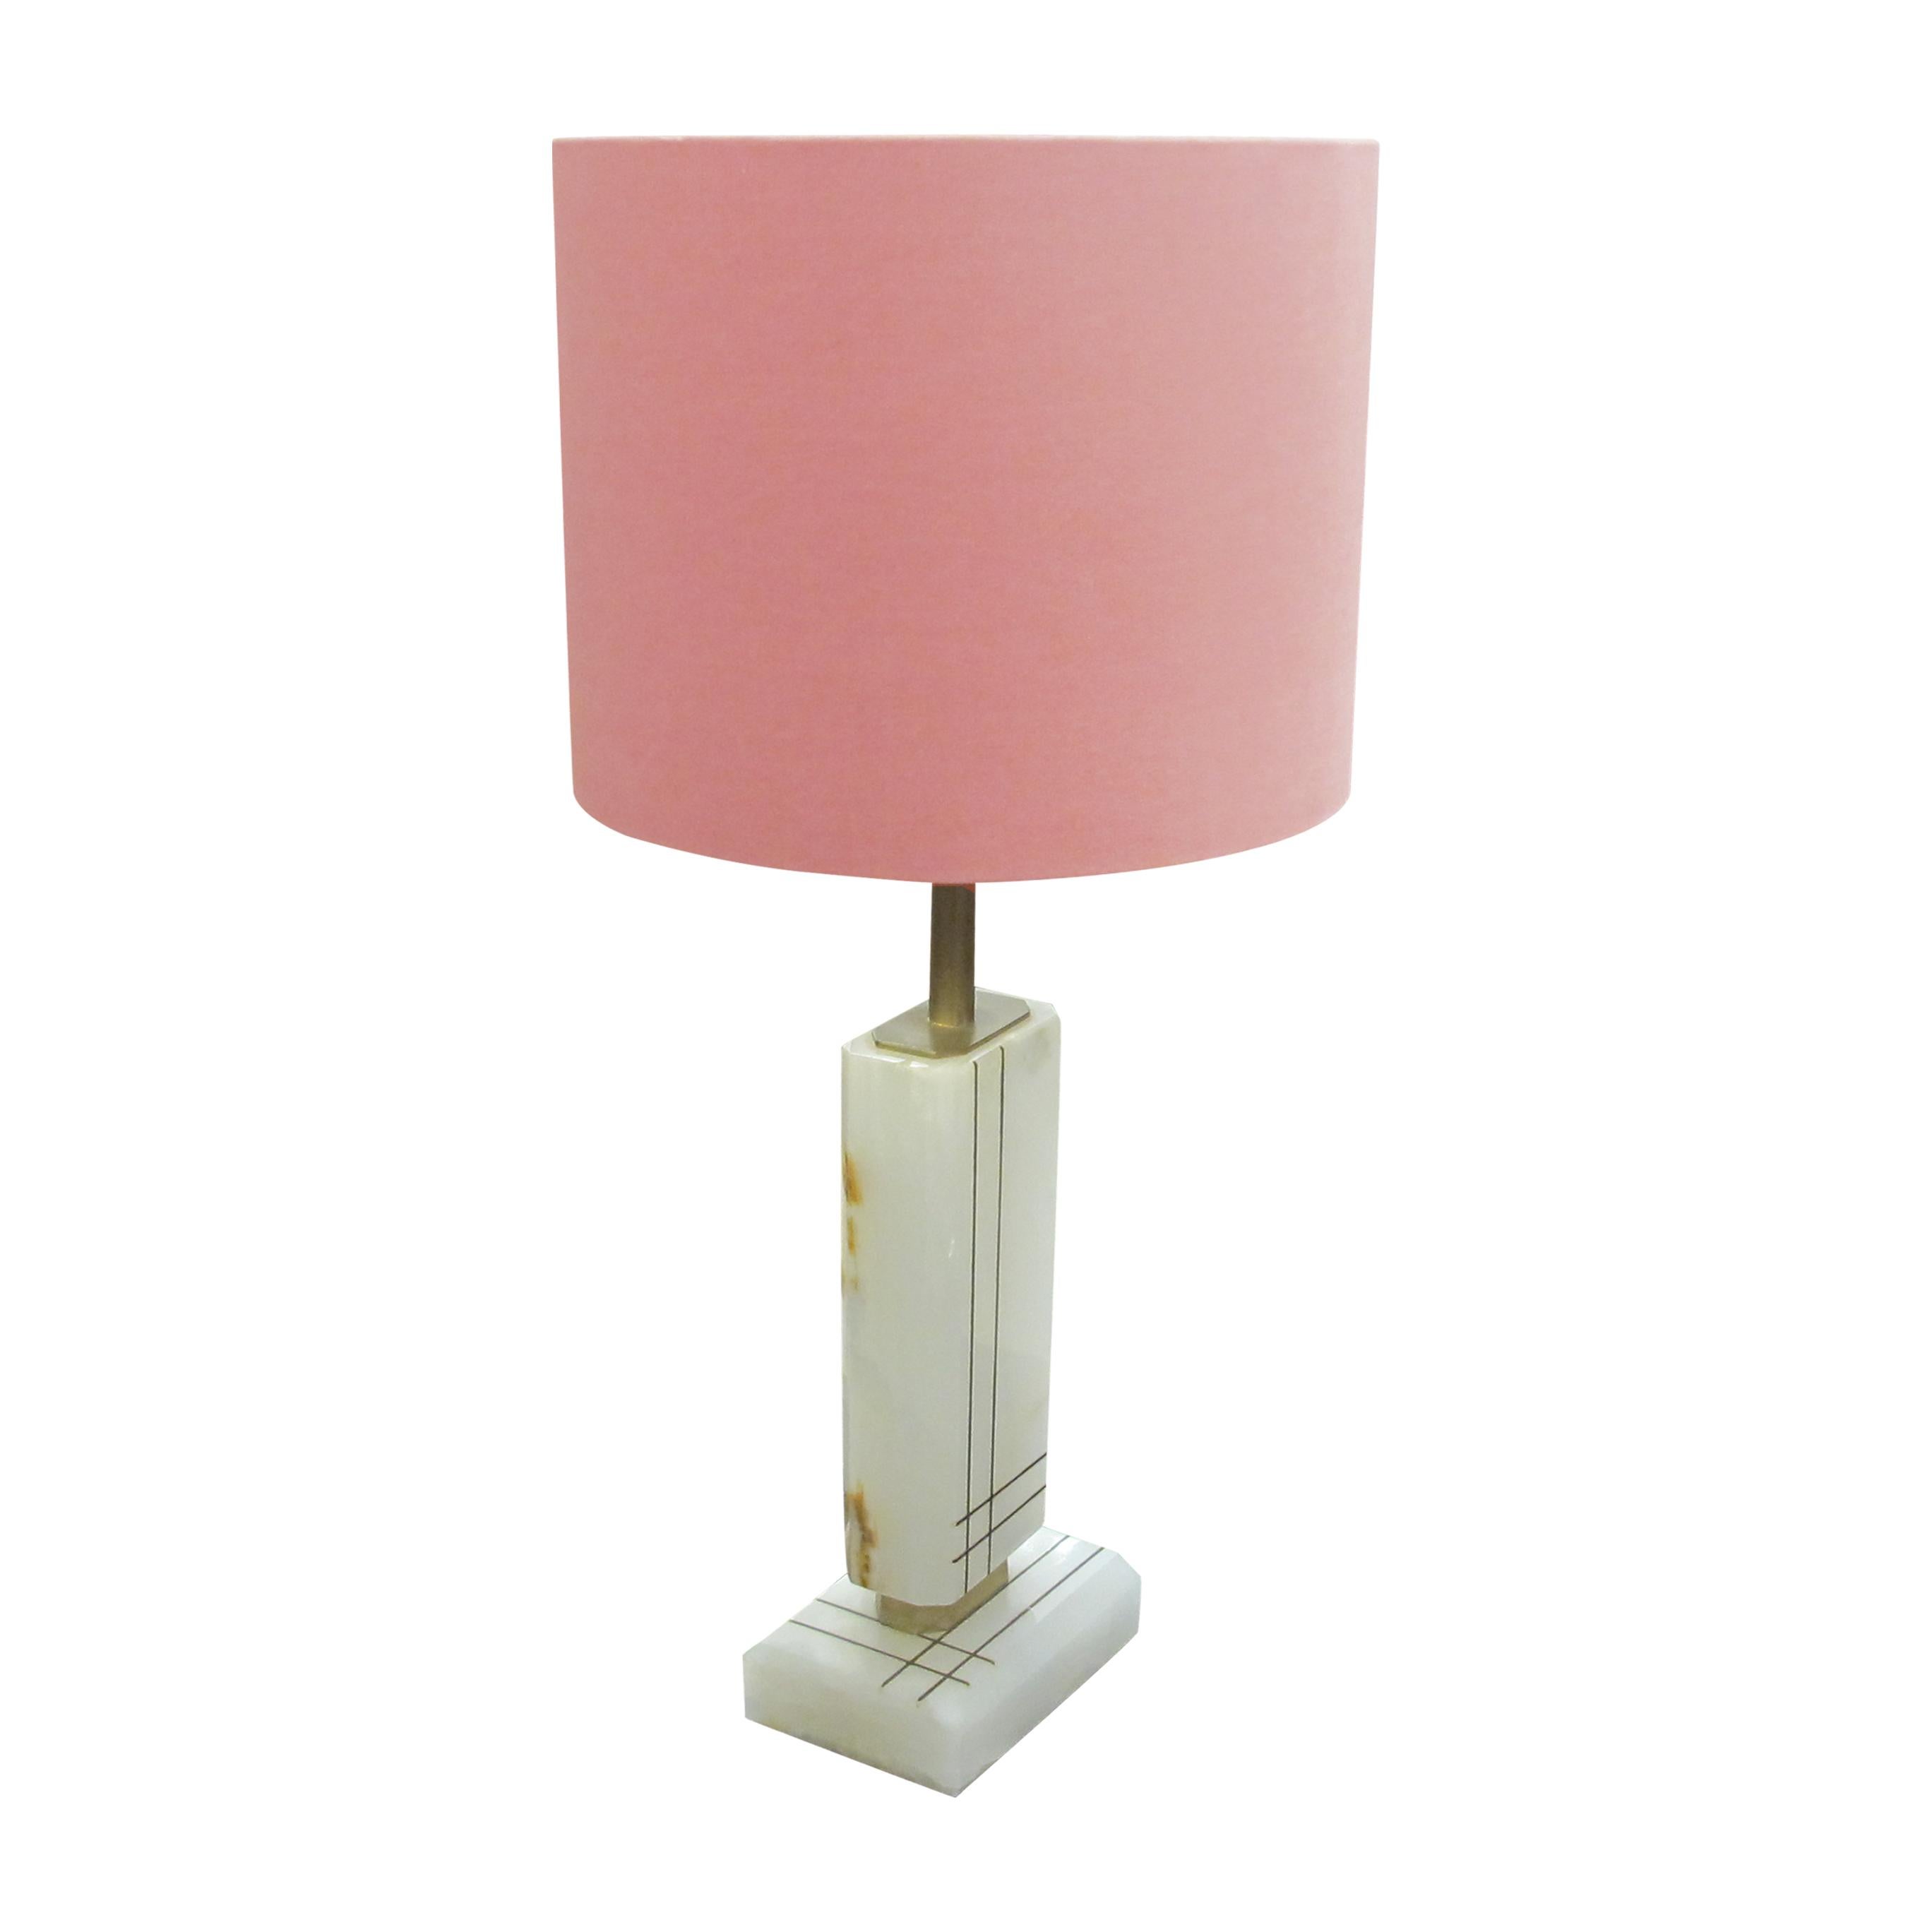 Mid-20th Century Pair of White Onyx Structural Table Lamps with Pink Shades, Italian 1960s For Sale